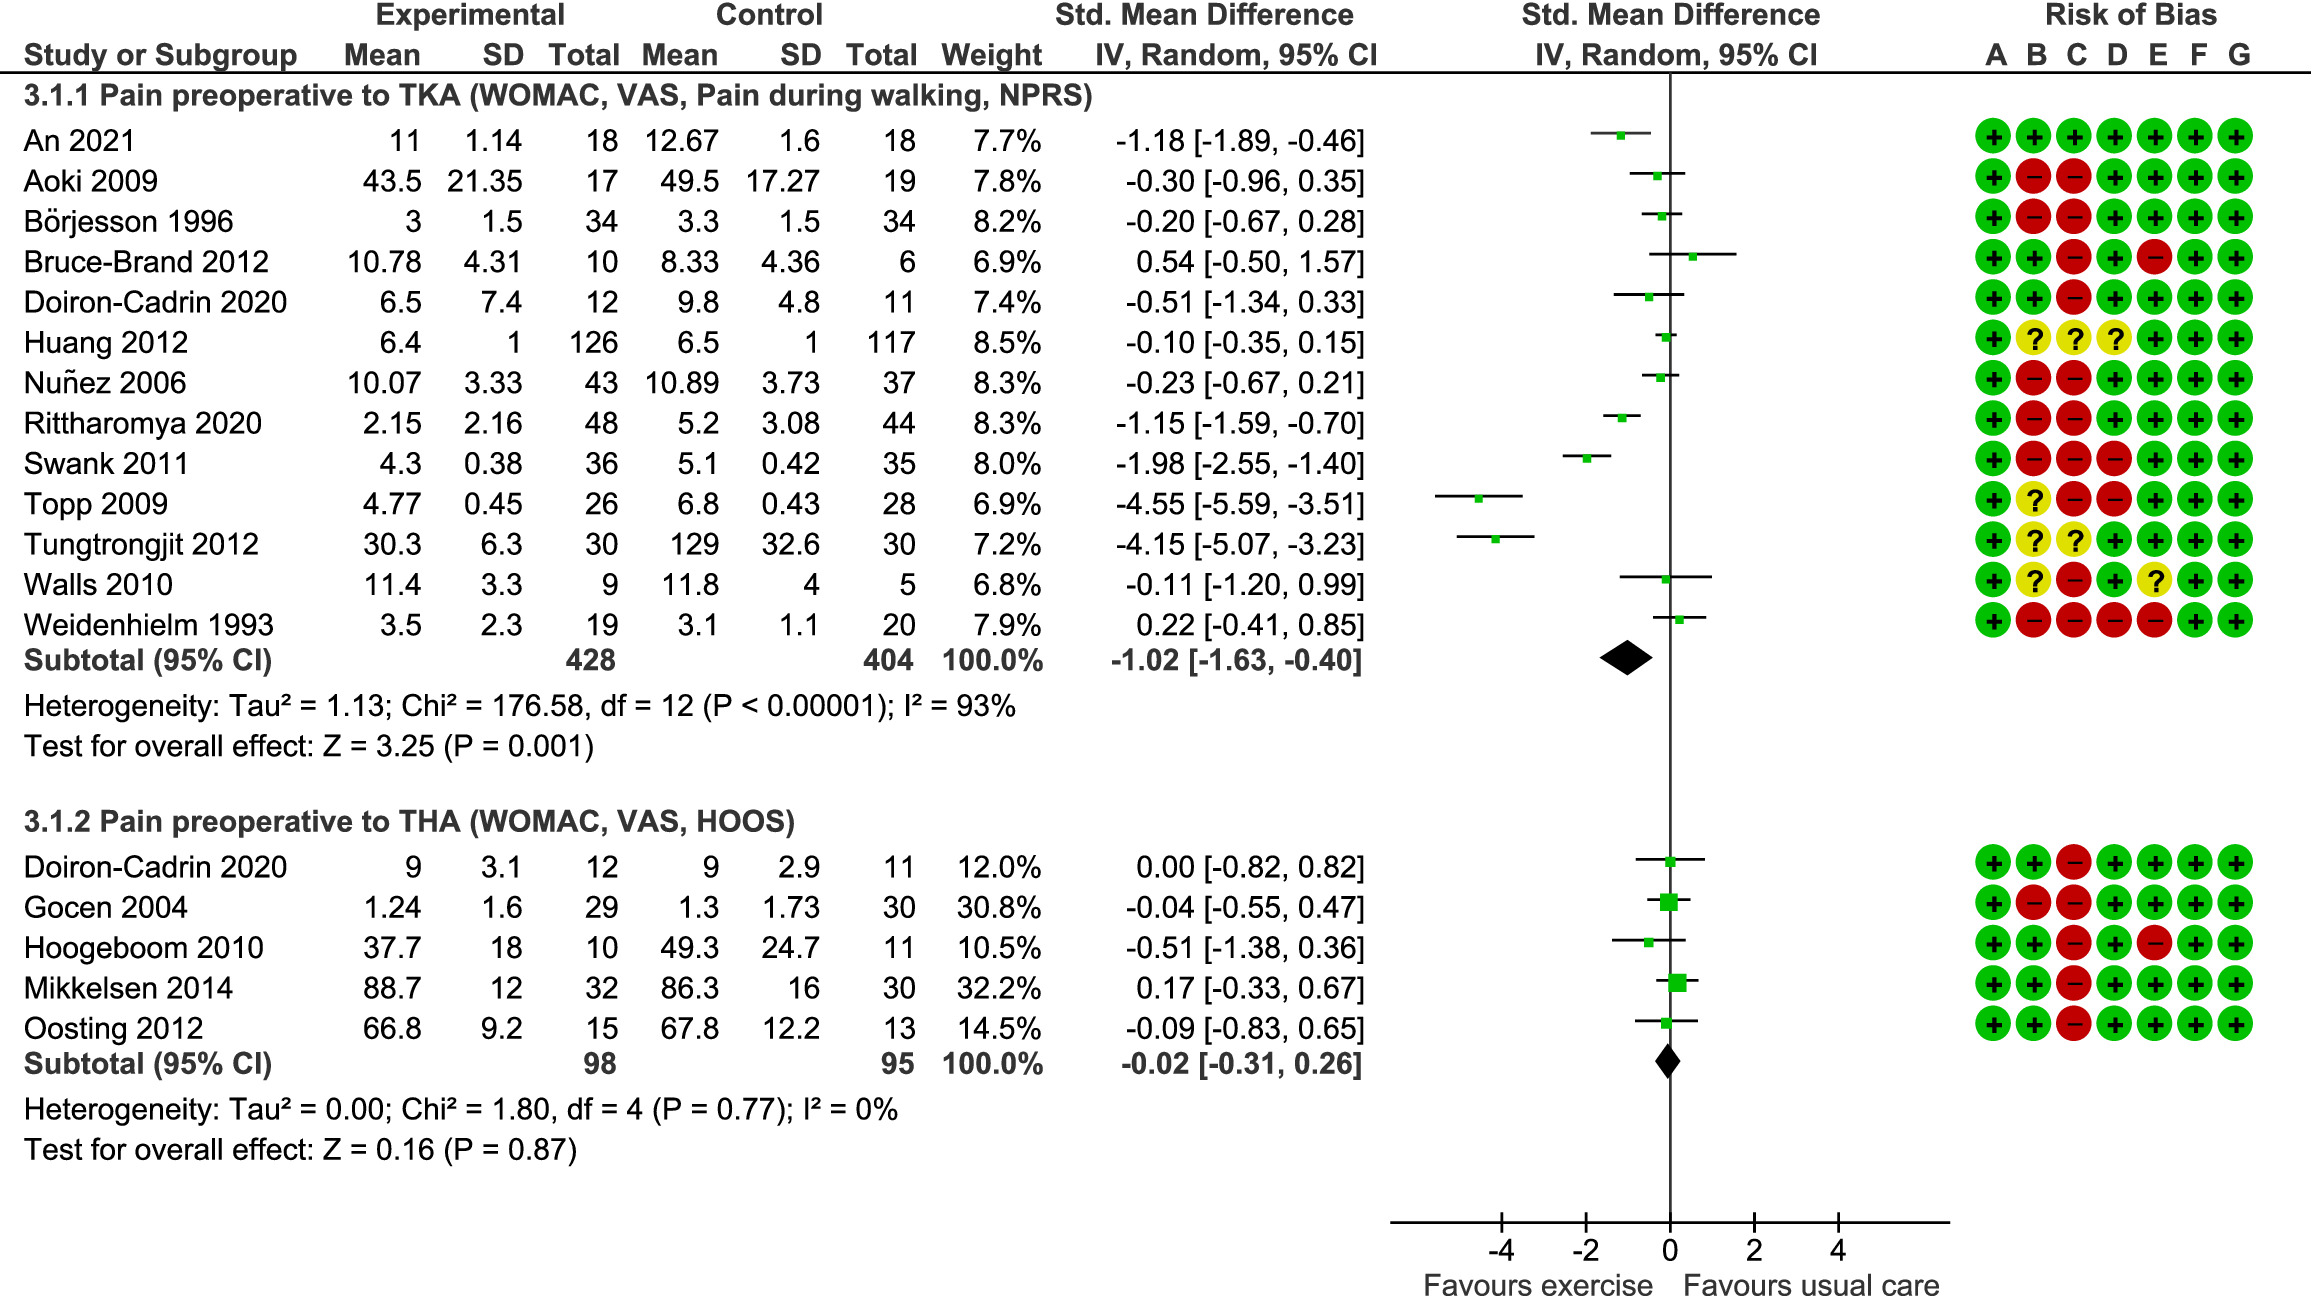 Fig. 3 
            Effect of prehabilitation vs standard care on pain prior to total knee arthroplasty (TKA) and total hip arthroplasty (THA). CI, confidence interval; HOOS, Hip Disability and Osteoarthritis Outcome Score; IV, inverse variance; NPRS, Numeric Pain Rating Scale; SD, standard deviation; VAS, visual analogue scale; WOMAC, Western Ontario and McMaster Universities Osteoarthritis Index.
          